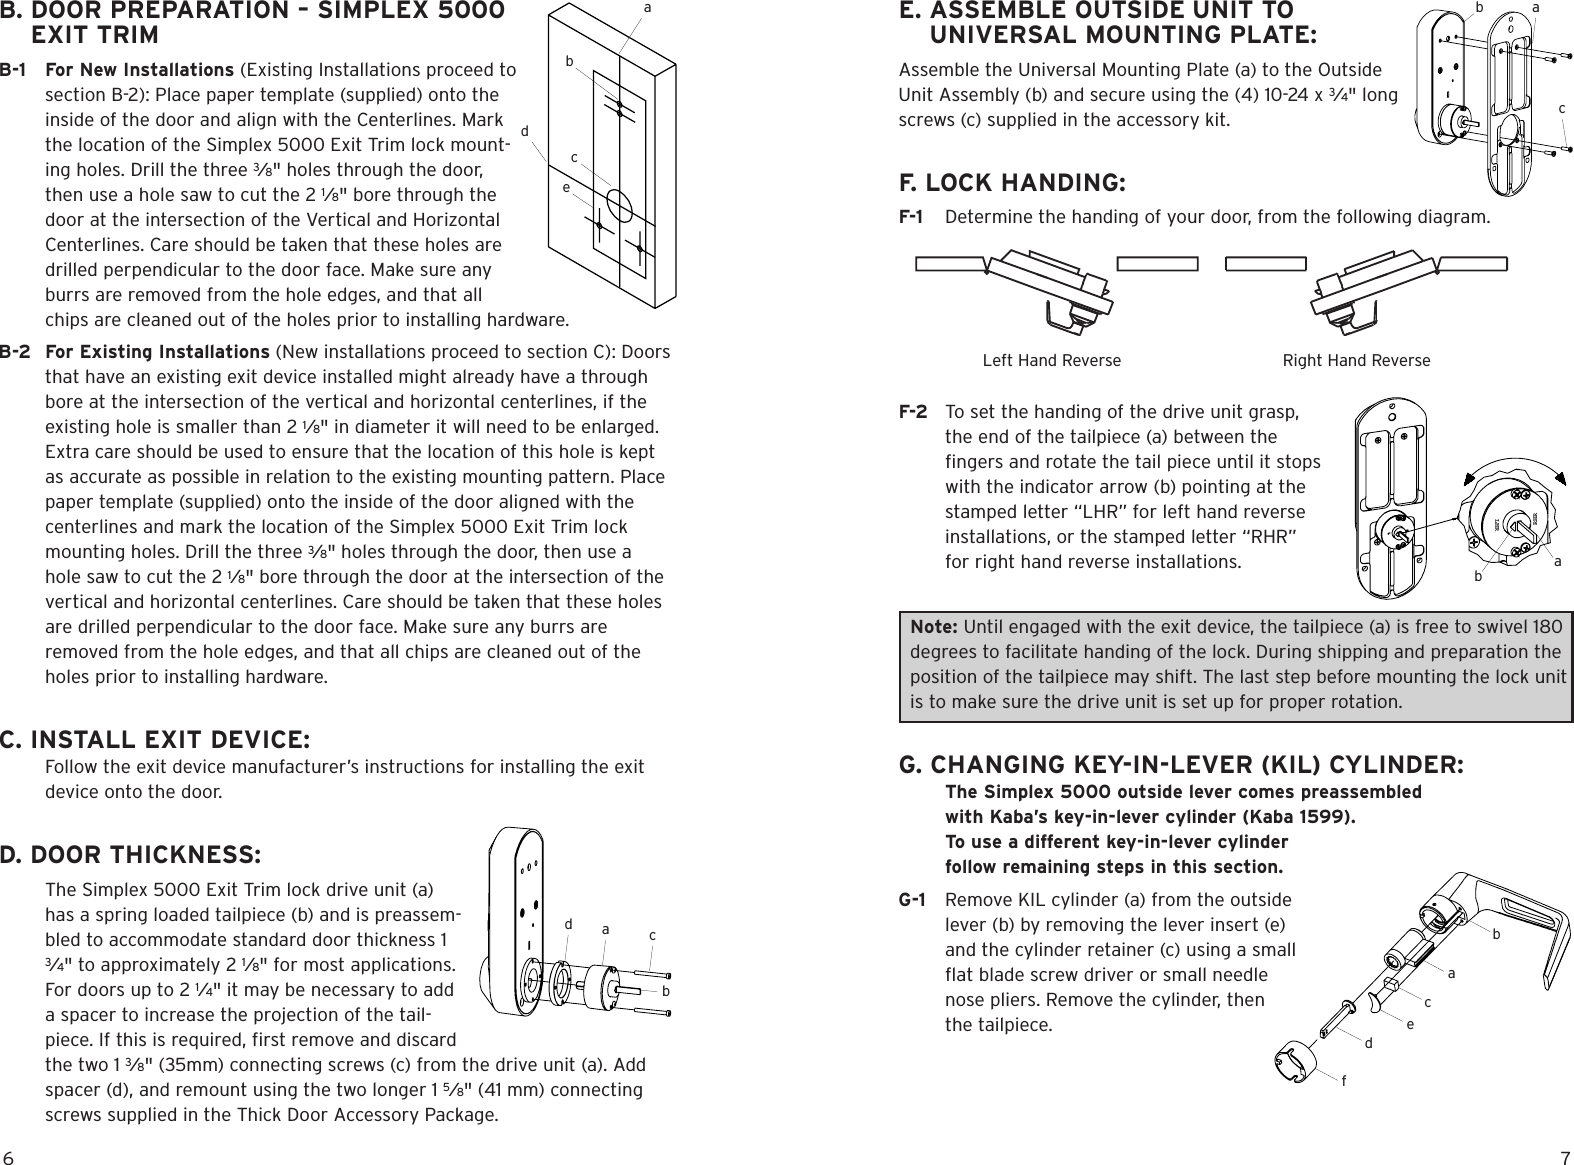 Page 4 of 12 - Kaba Access  Simplex Mechanical Pushbutton Lock - 5000 Series Exit Installation Instructions Simplex-5000-exit-installation-instructions-pkg3054